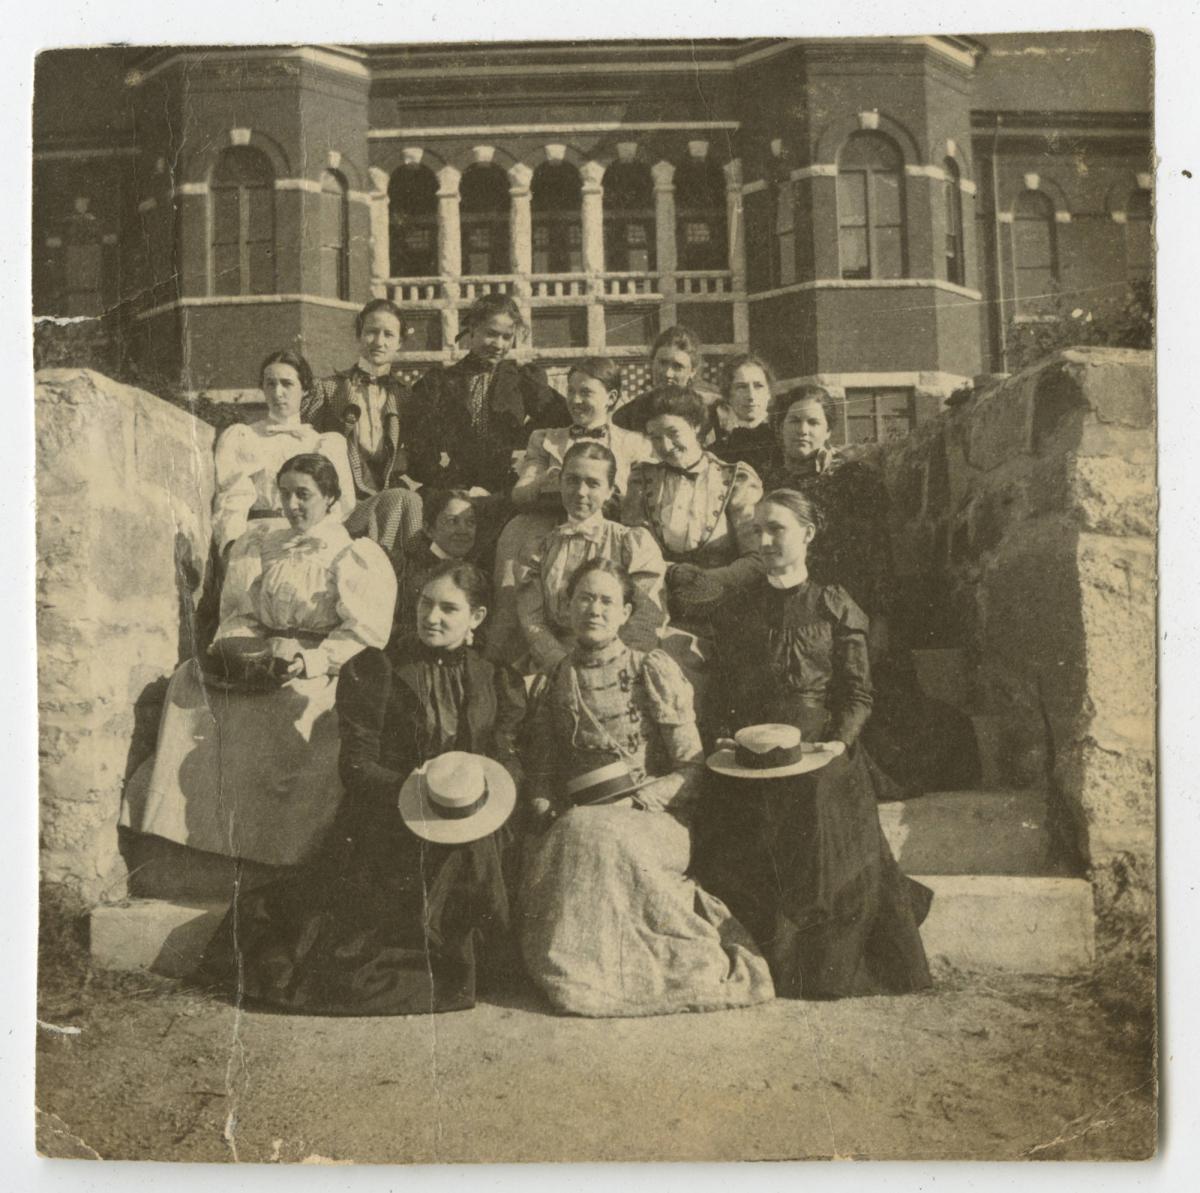 Thirteen students sit on the steps of a campus building for a group photo.